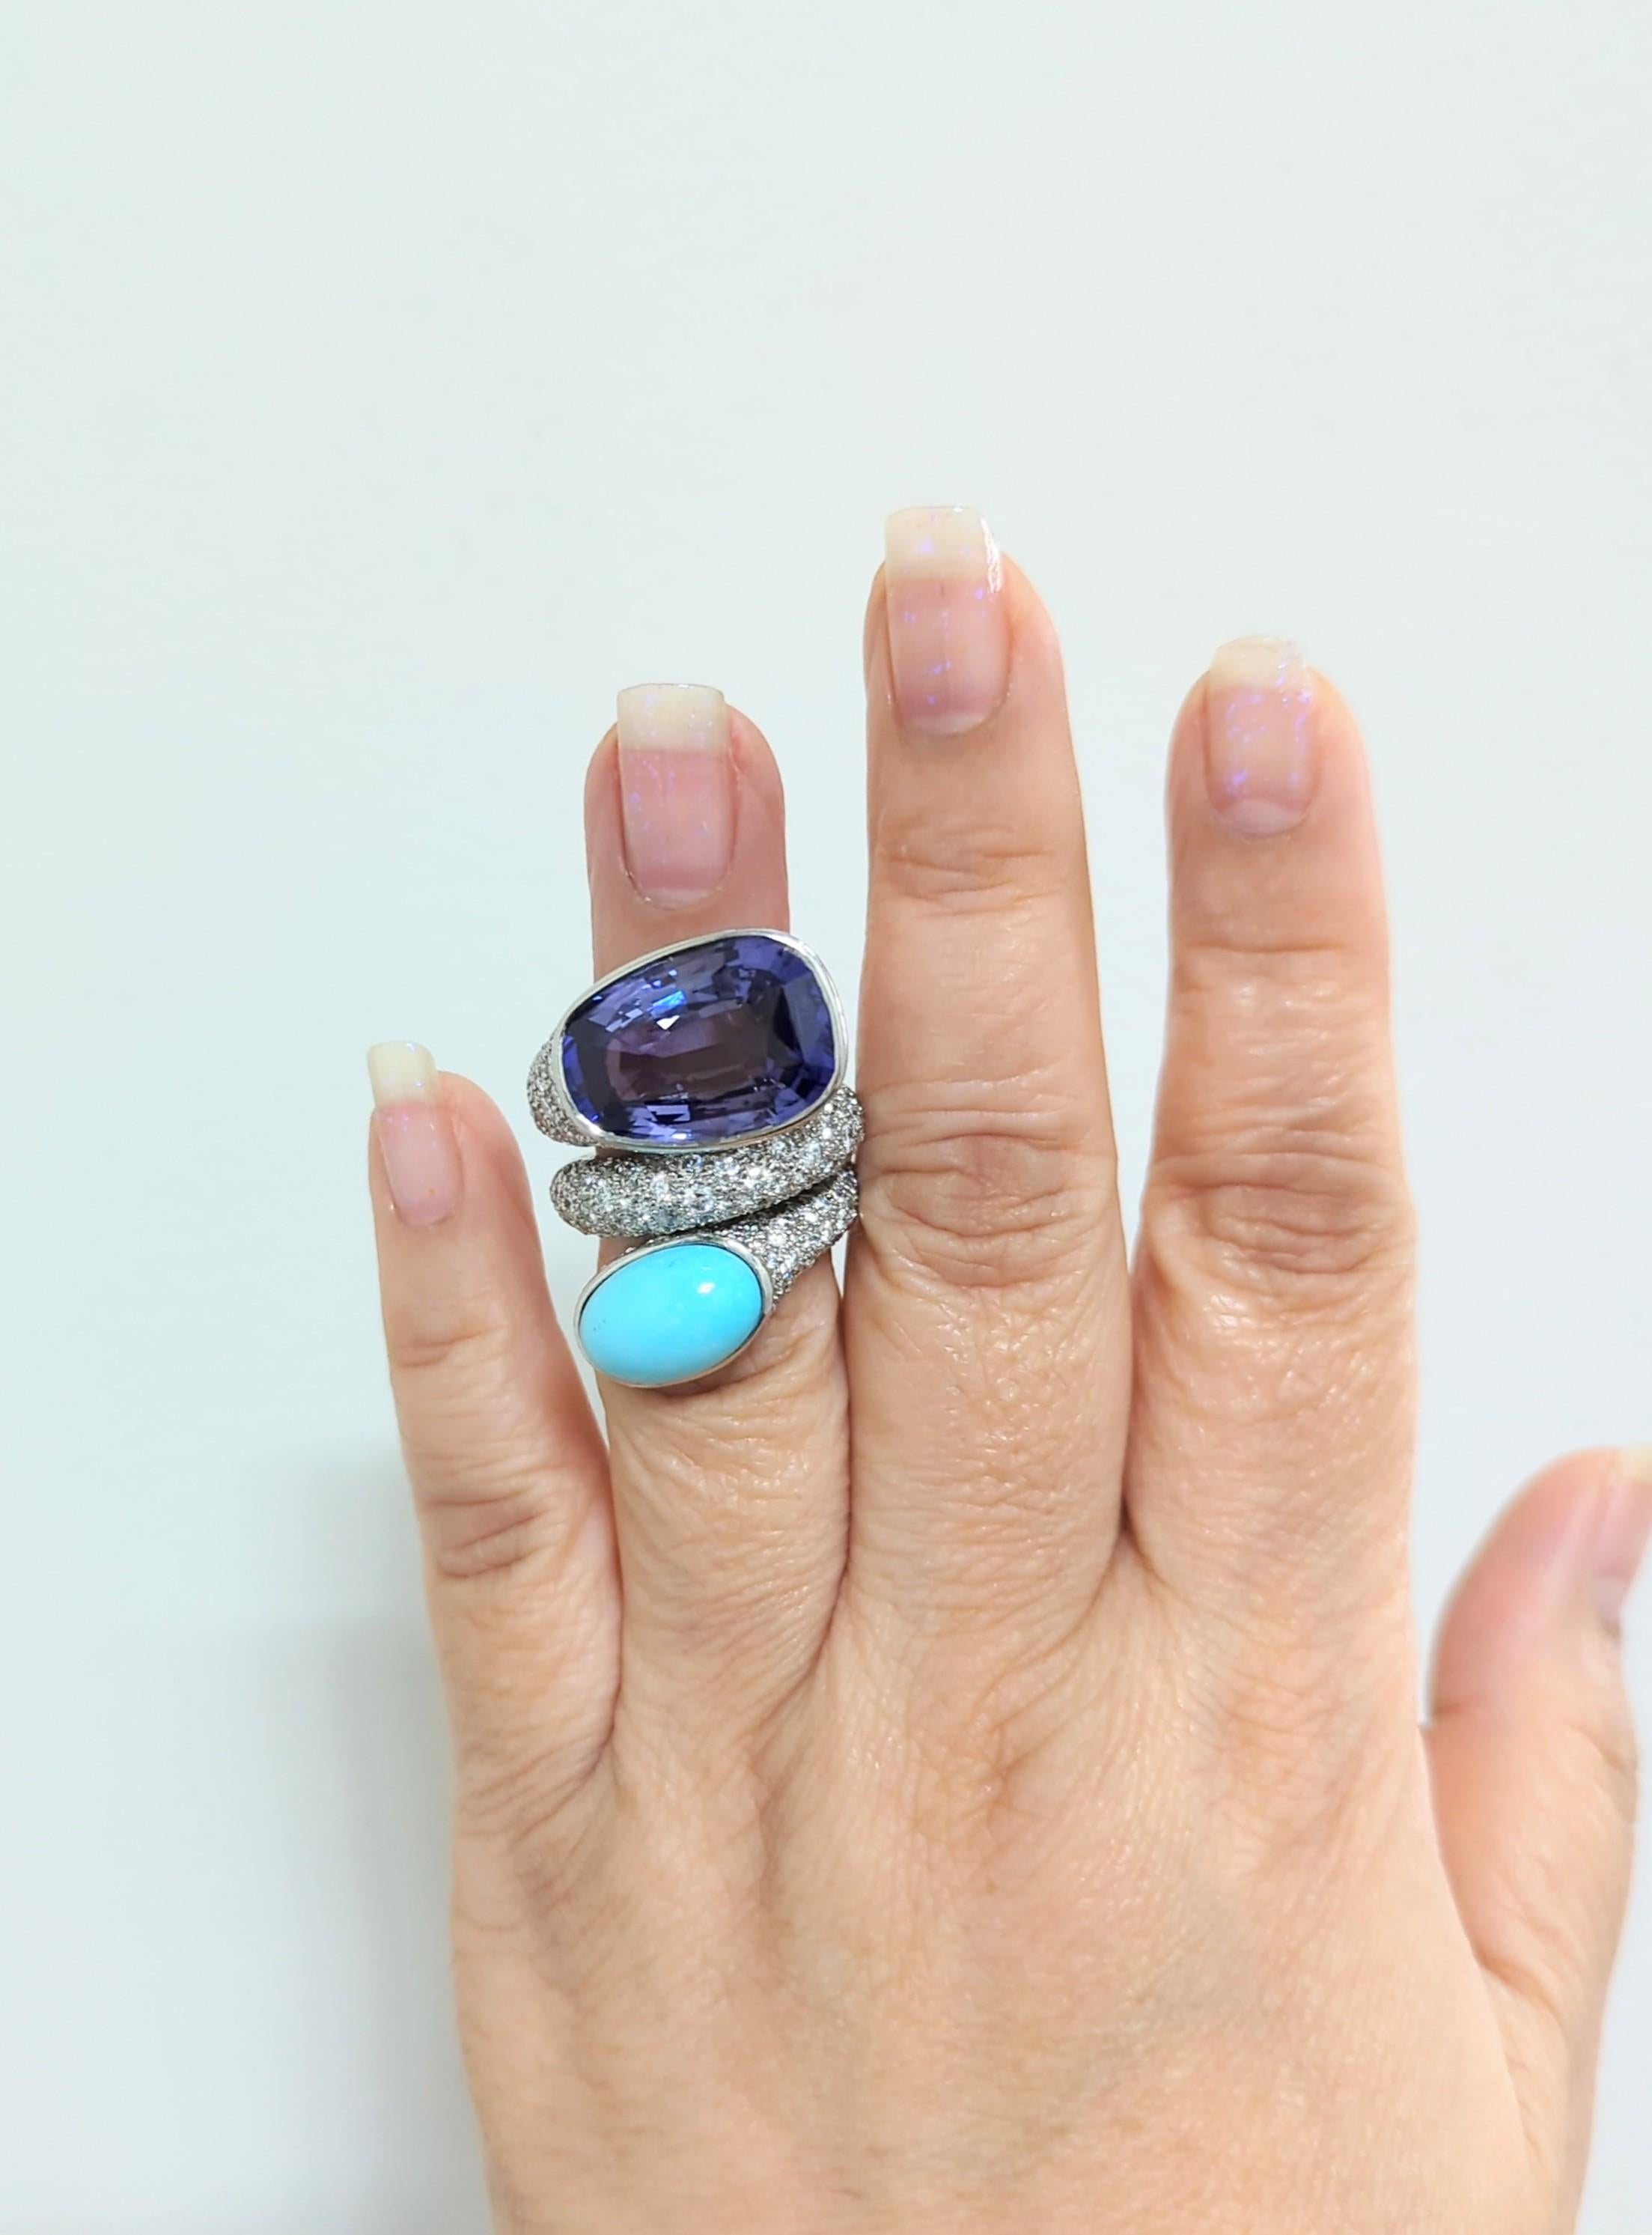 Gorgeous estate David Webb ring featuring a 18.65 ct. Ceylon blue sapphire with a 6.72 ct. turquoise cabochon.  Handmade in platinum.  Good quality white diamond rounds.  Ring size 6.5.